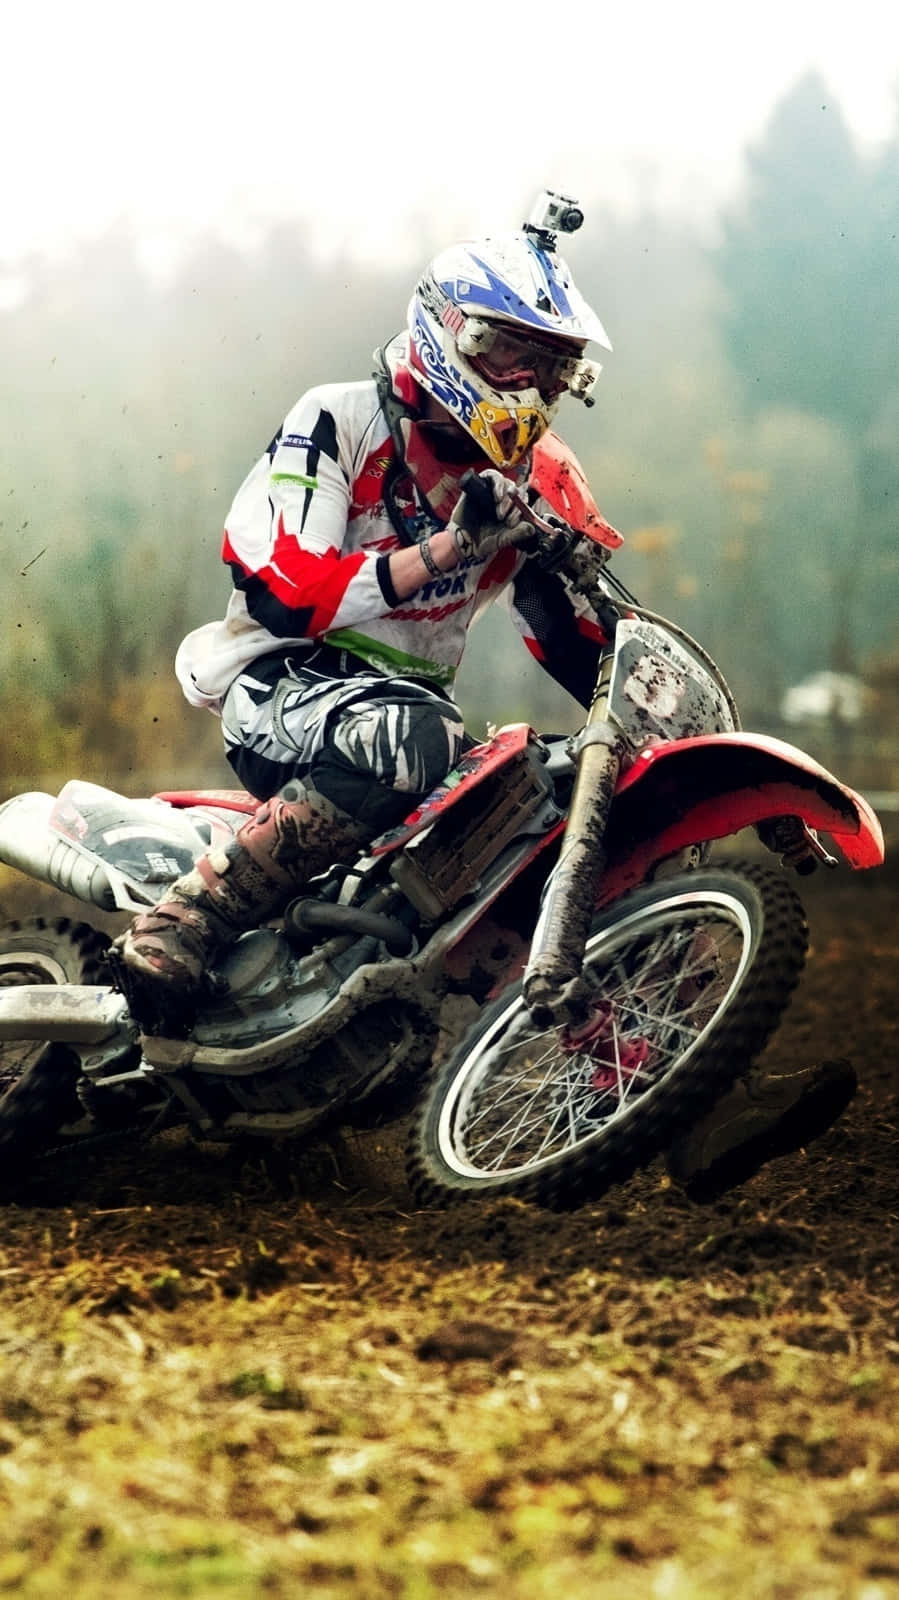 Caption: Thrilling Ride Through The Mud - Motocross Rider In Action Wallpaper